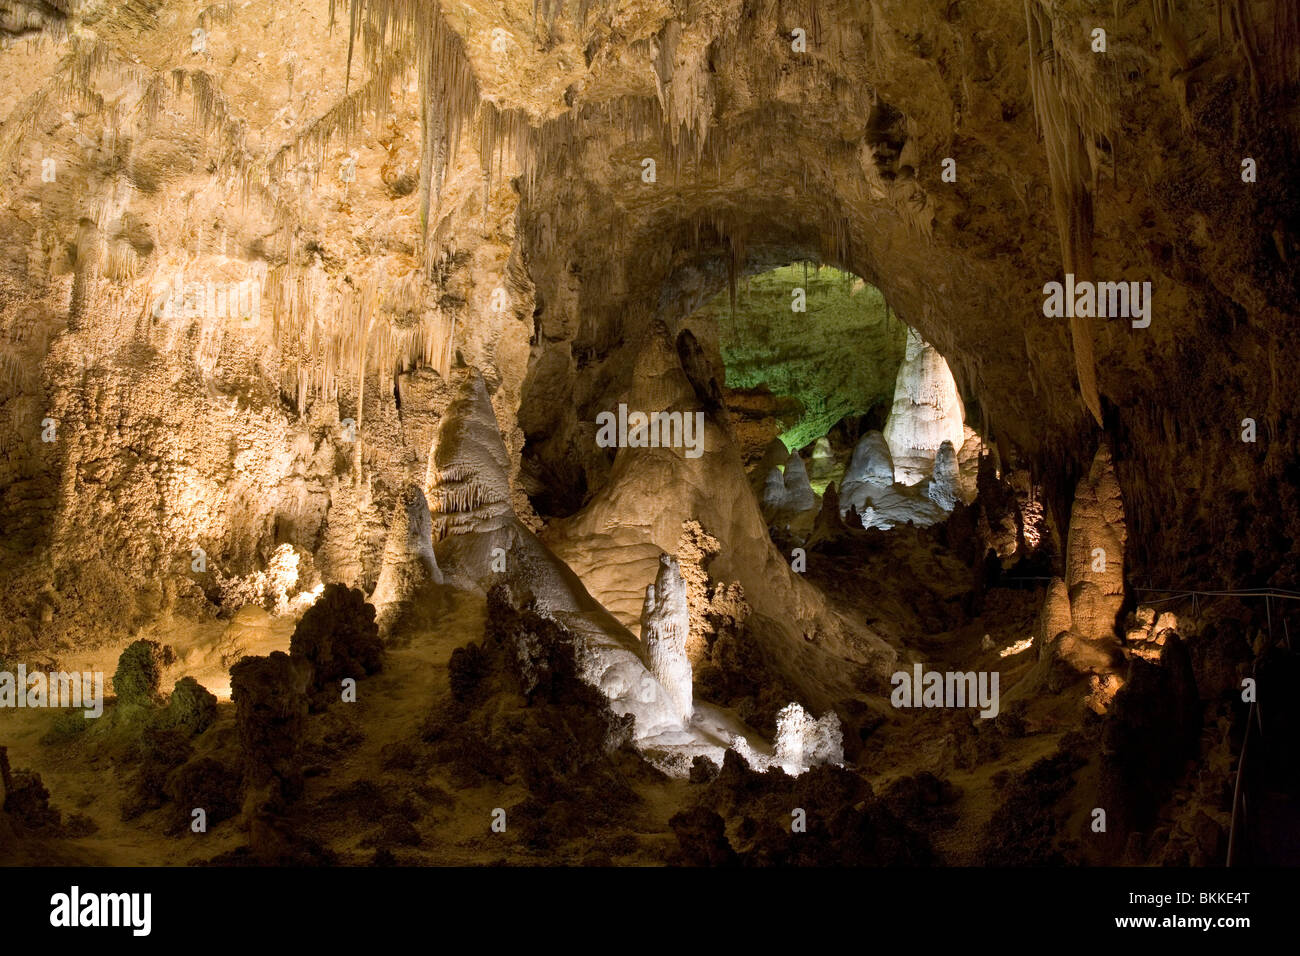 Looking from the Big Room into the Hall of Giants inside Carlsbad Caverns. Stock Photo